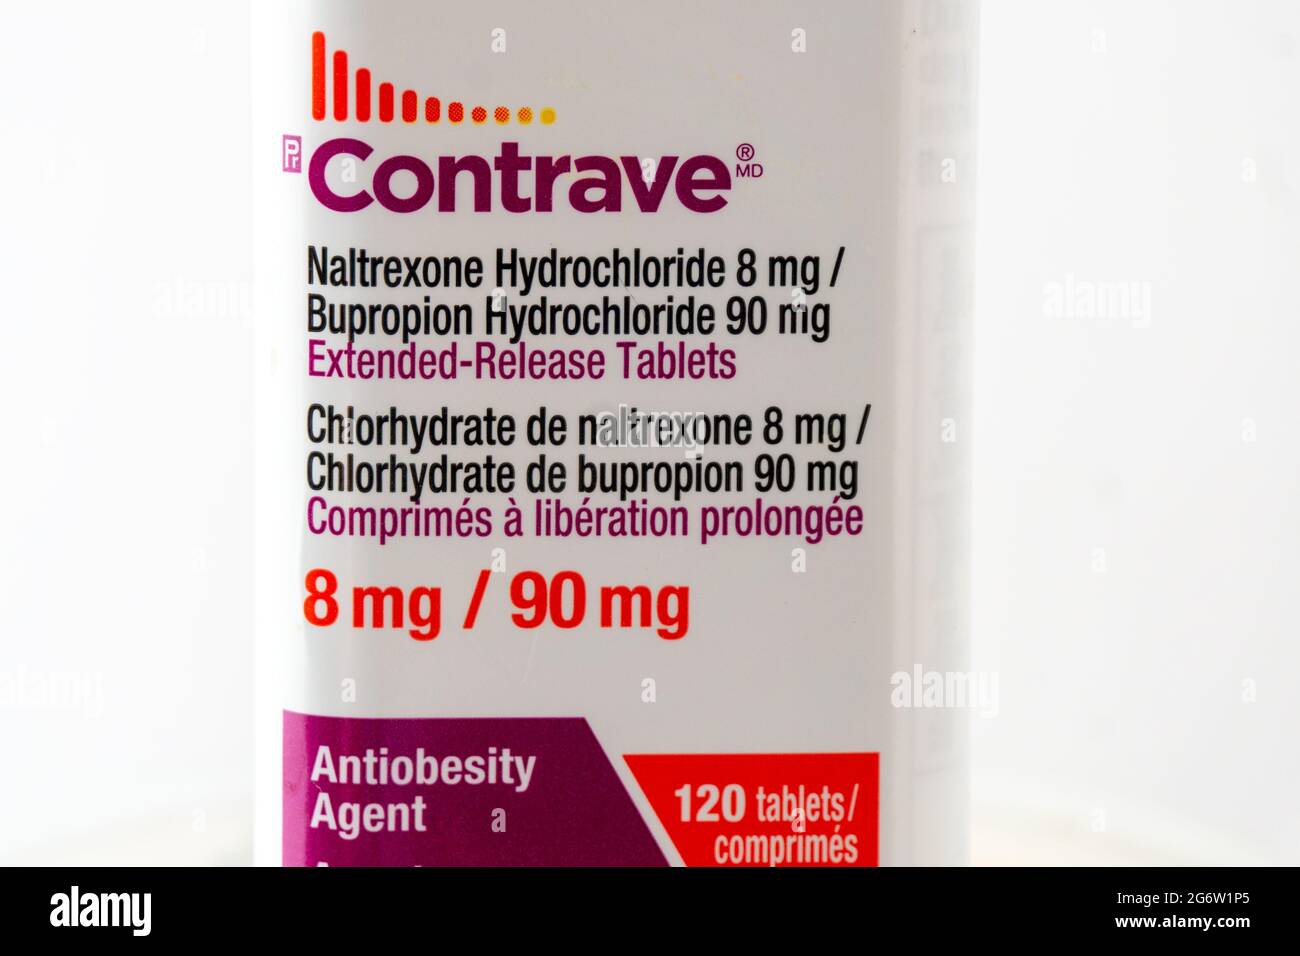 Contrave a weight management prescription medication by Valeant Pharmaceuticals Stock Photo